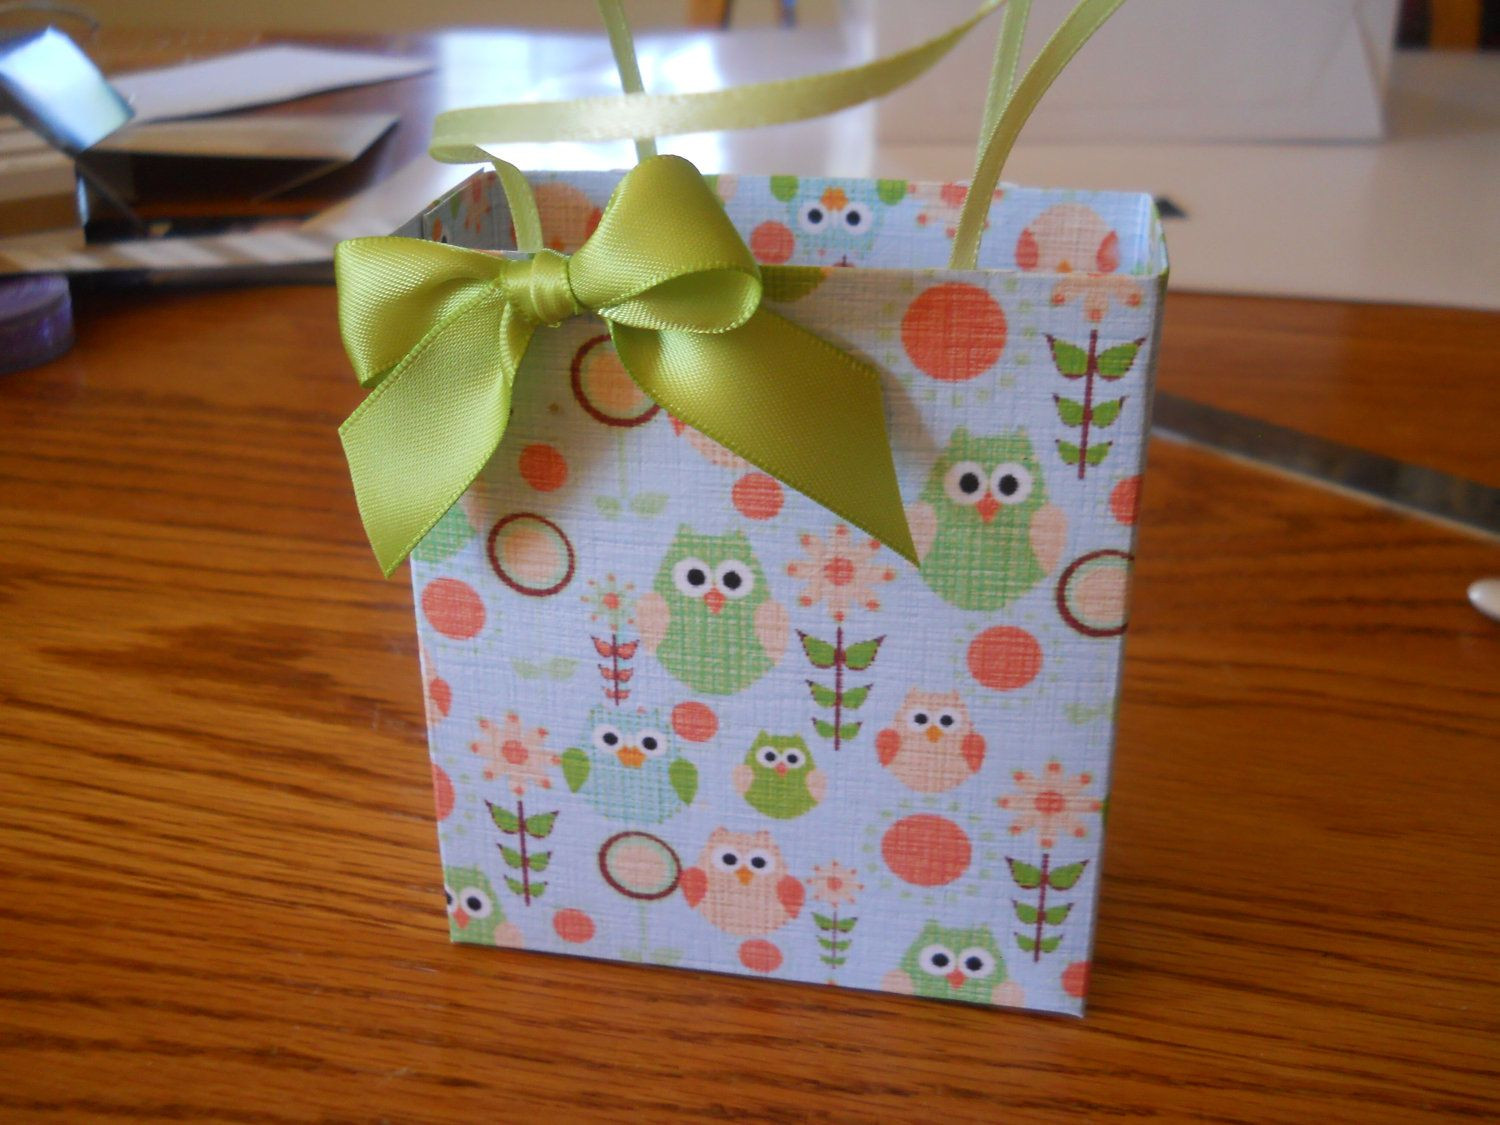 Owl Party Favors For Baby Shower
 Owl baby shower party favors $1 75 via Etsy